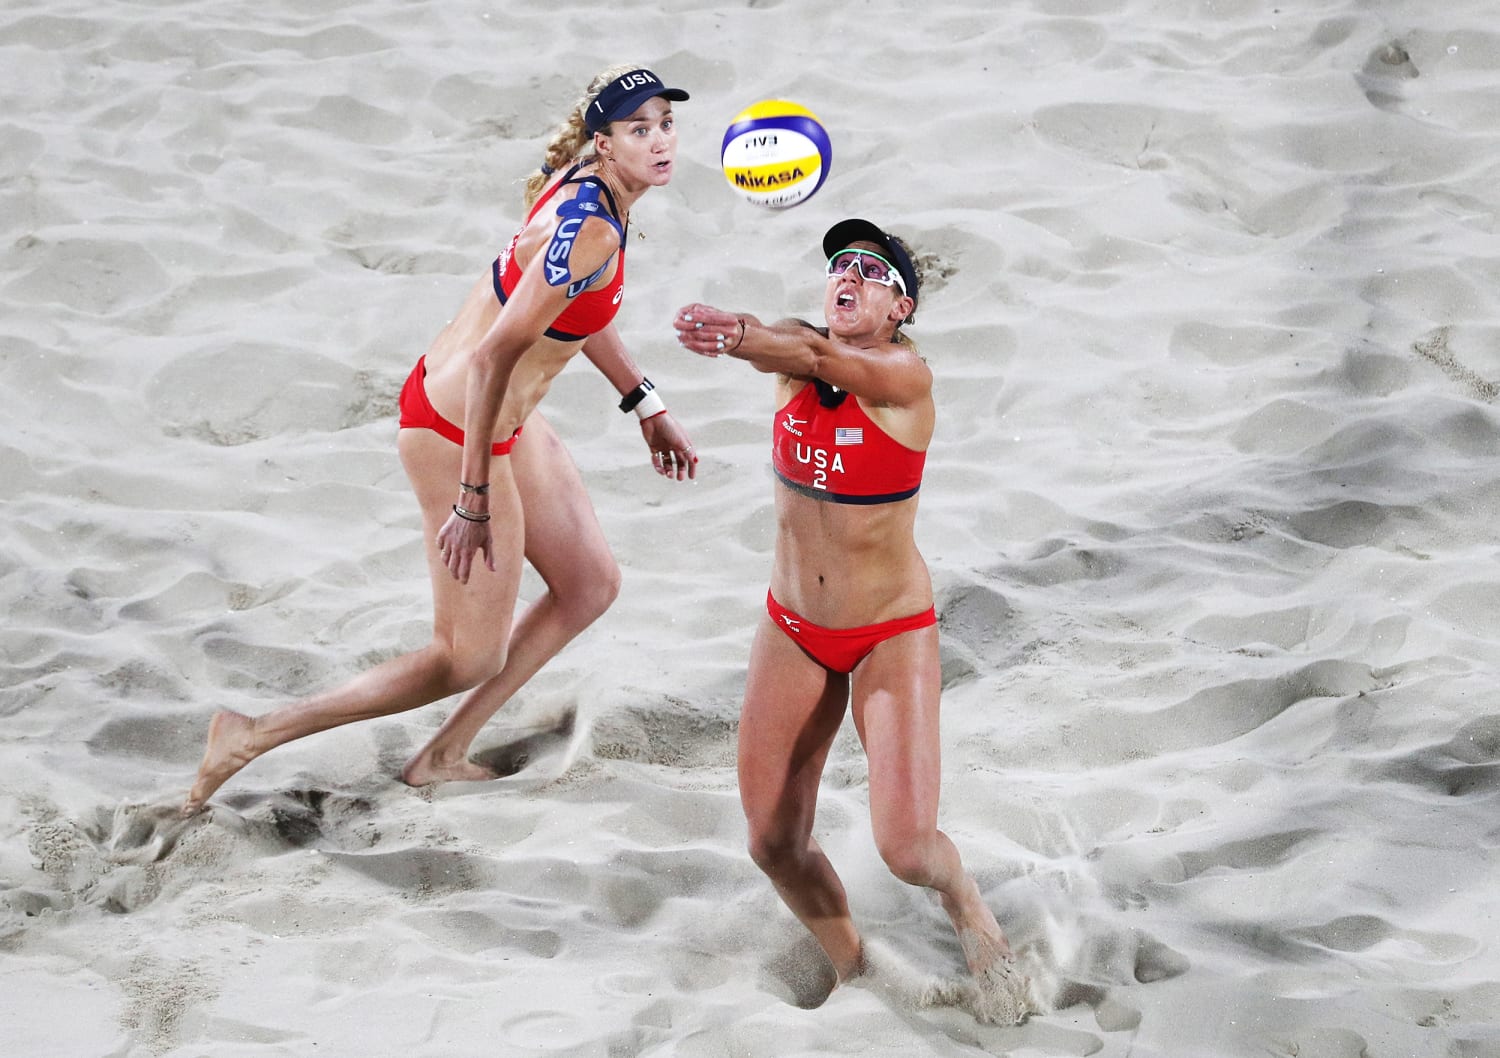 angelo marano recommends Photos Of Female Beach Volleyball Players